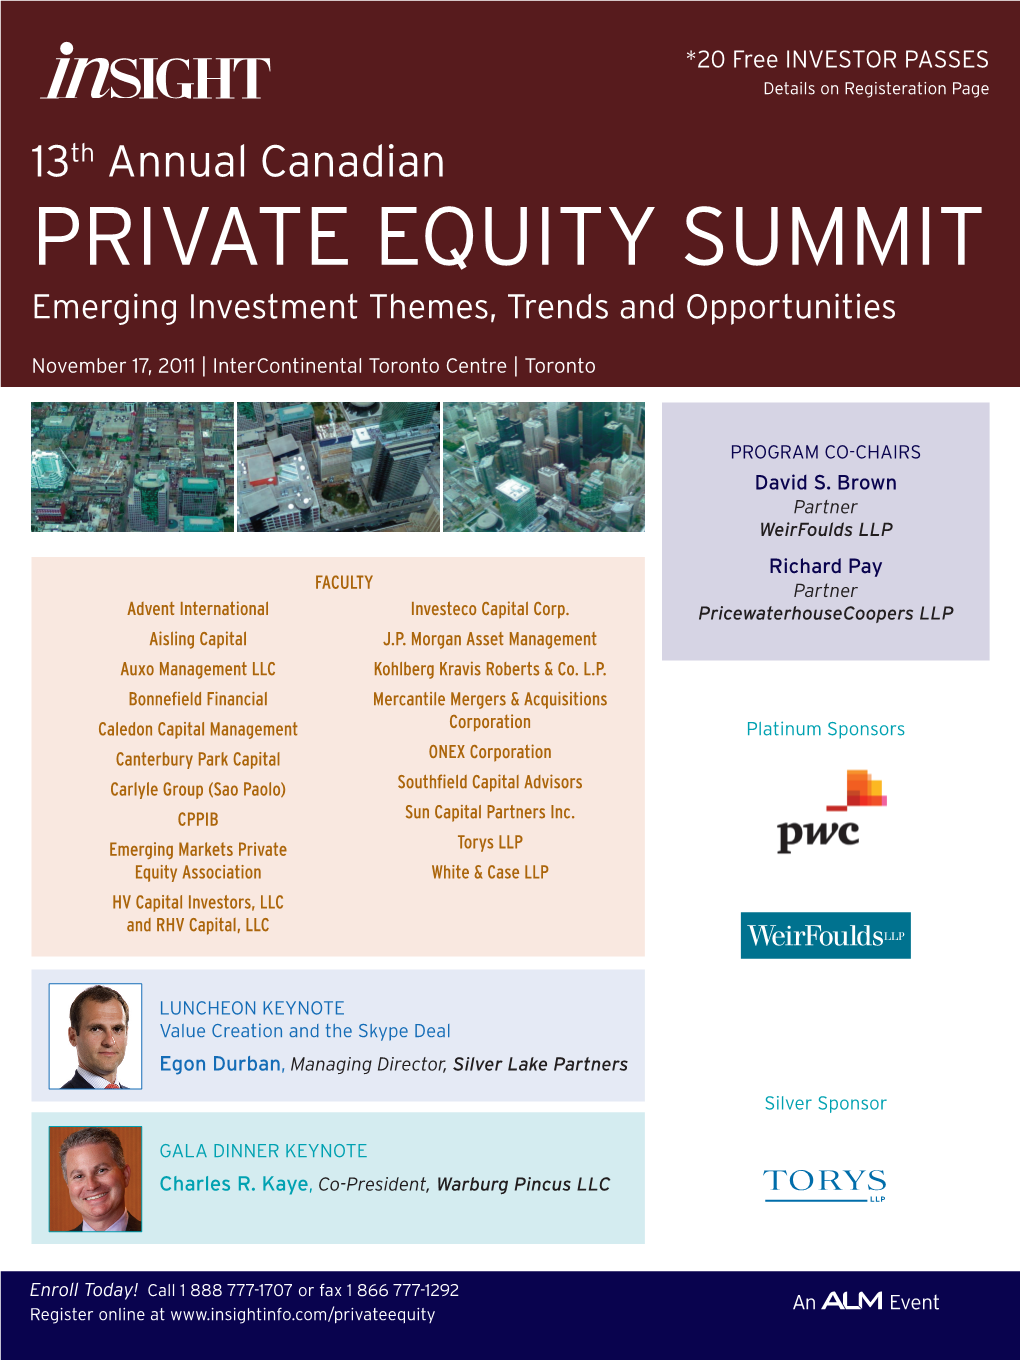 PRIVATE EQUITY Summit Emerging Investment Themes, Trends and Opportunities